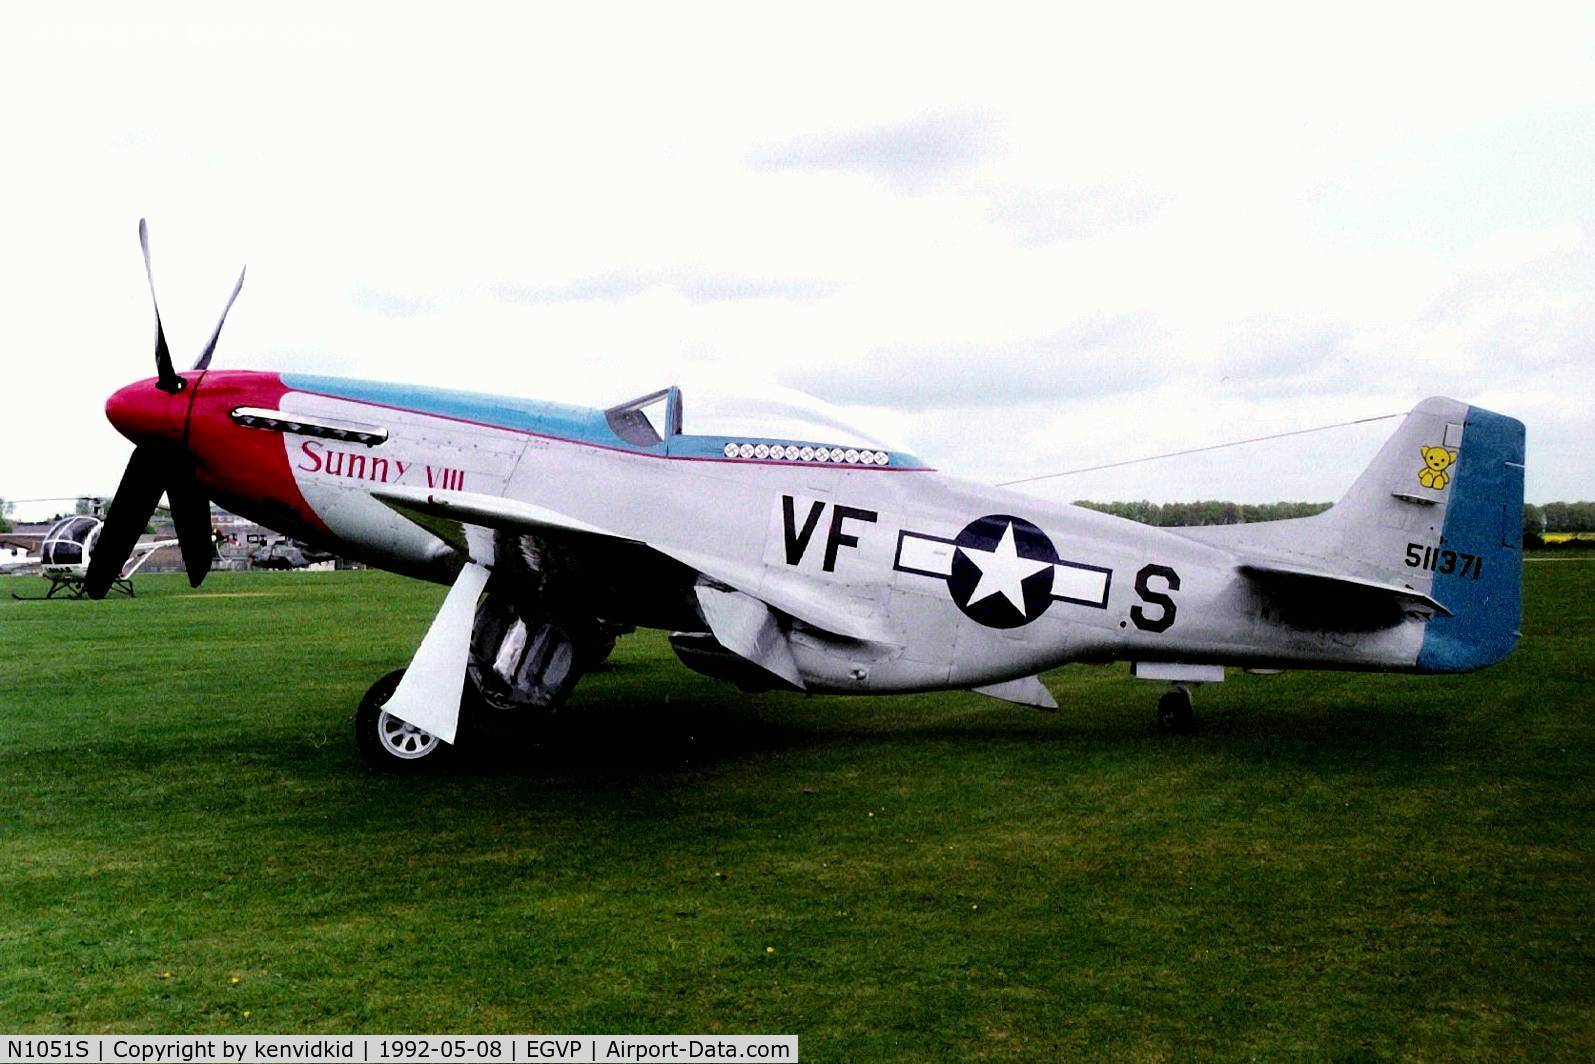 N1051S, 1963 North American P-51D Mustang C/N 124-48124 (45-11371), At the World Helicopter Championships, Middle Wallop.